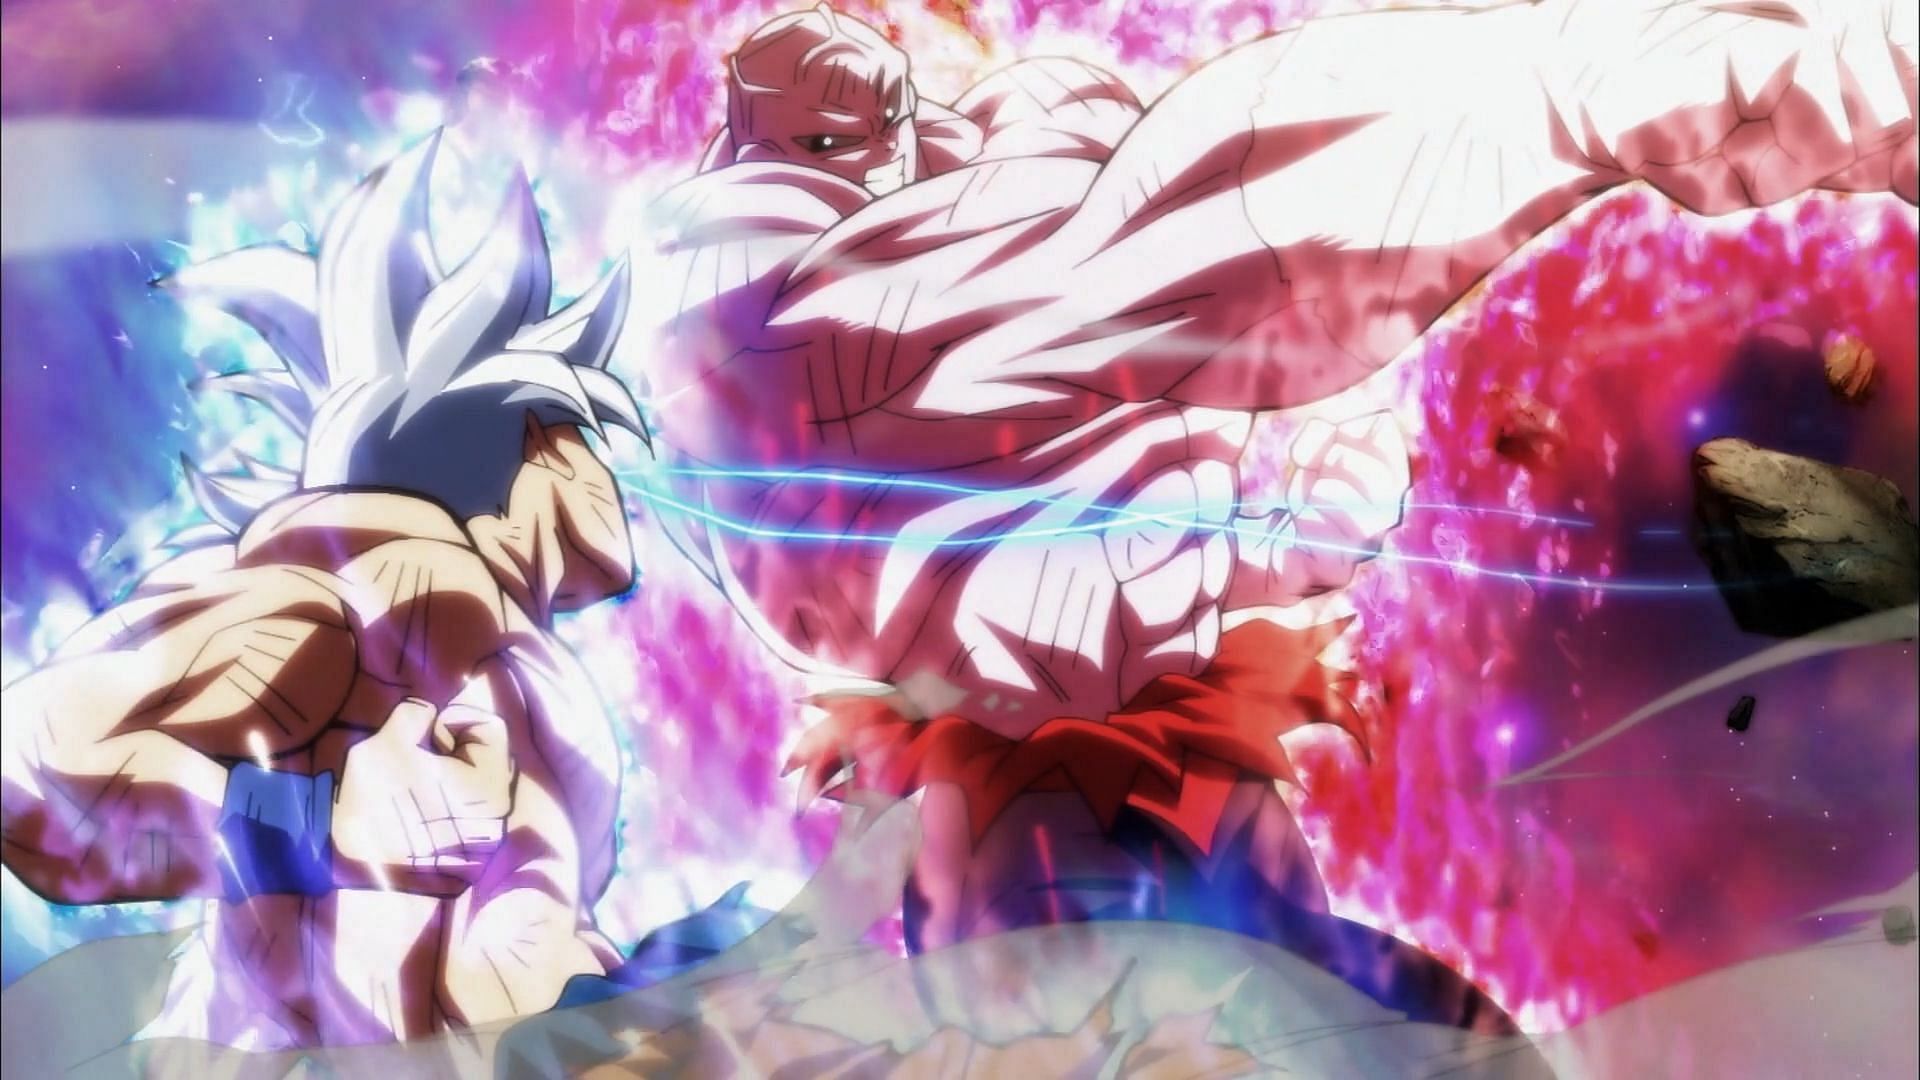 Goku's clash with Jiren was truly a spectacle to witness (Image via Toei Animation)